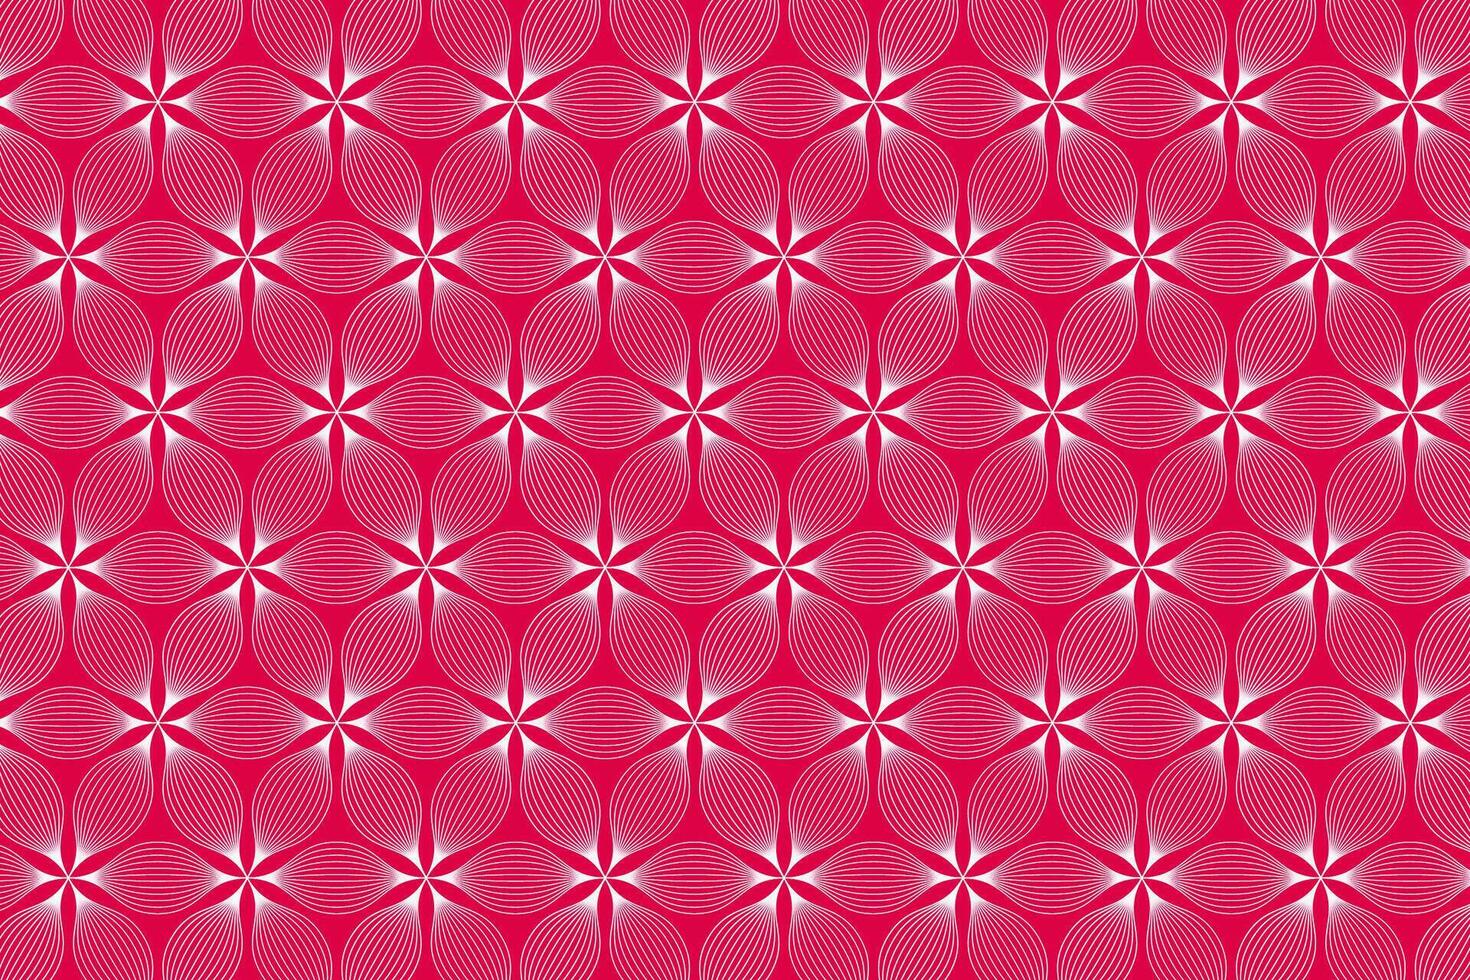 White wavy floral lines seamless pattern. Wave line flowers on pink background. Vector illustration.